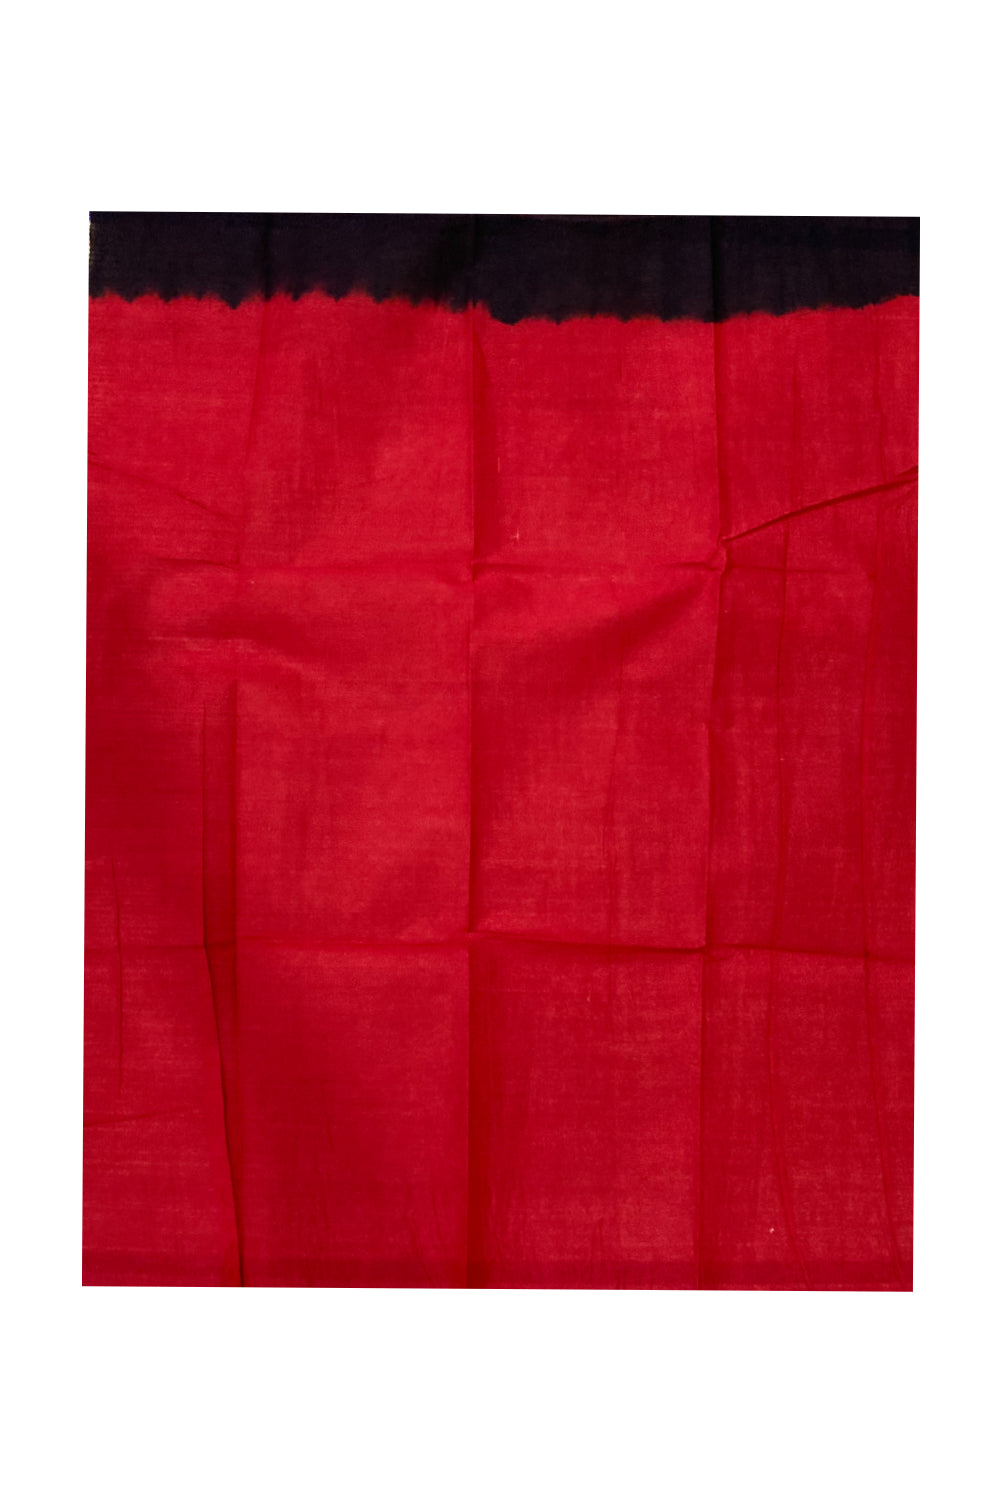 Southloom Cotton Navy Blue Red Saree with Red Blouse Piece